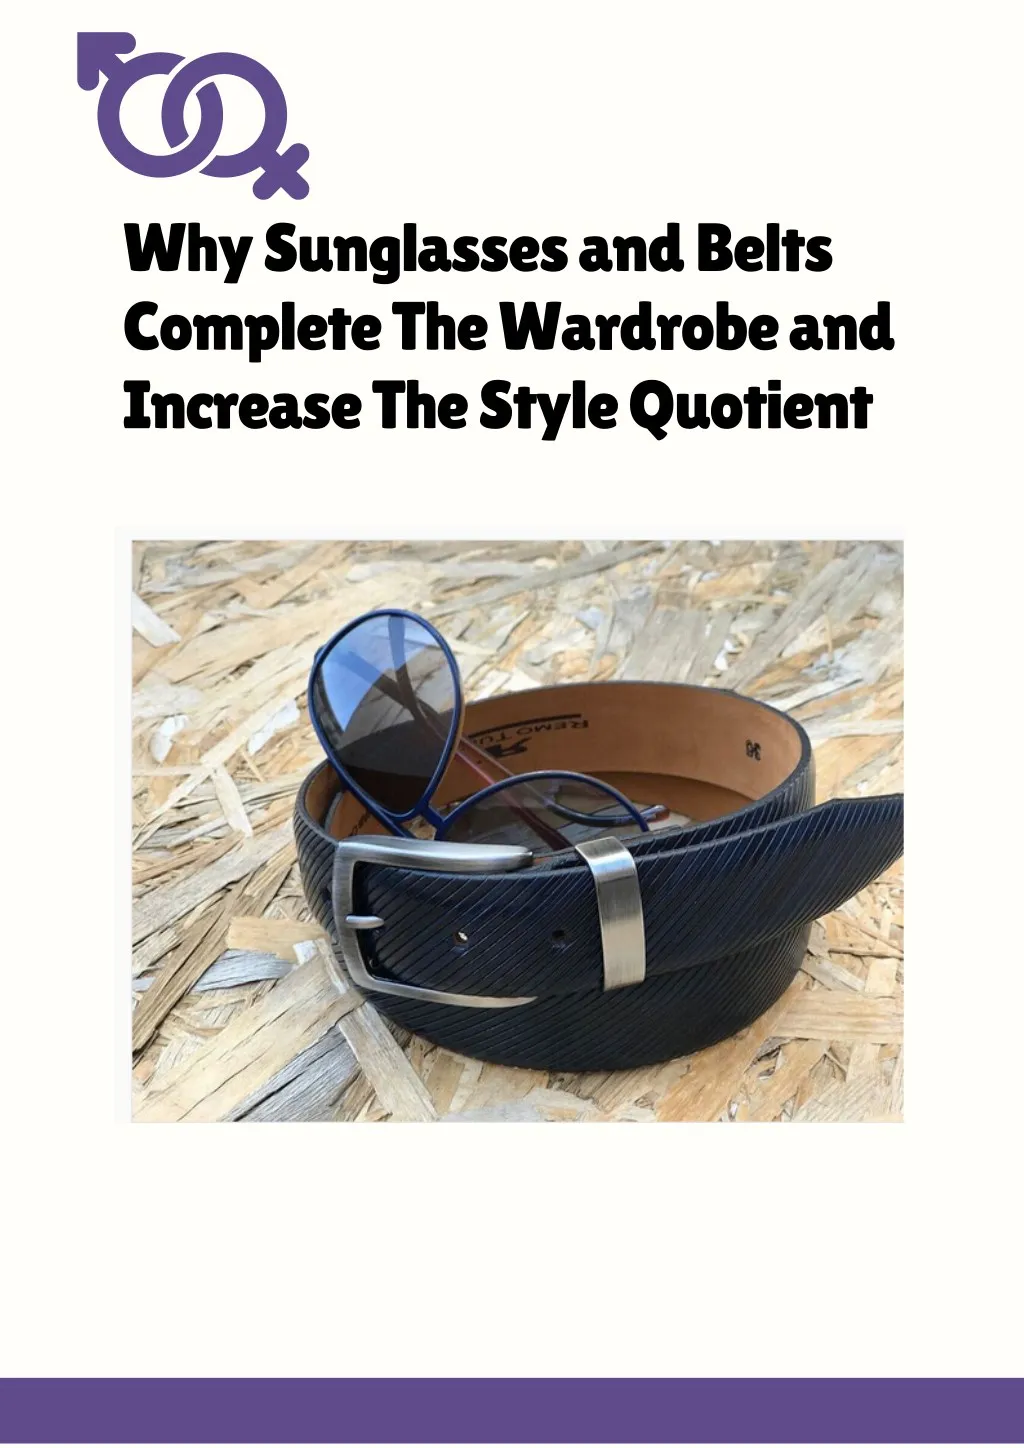 why sunglasses and belts complete the wardrobe